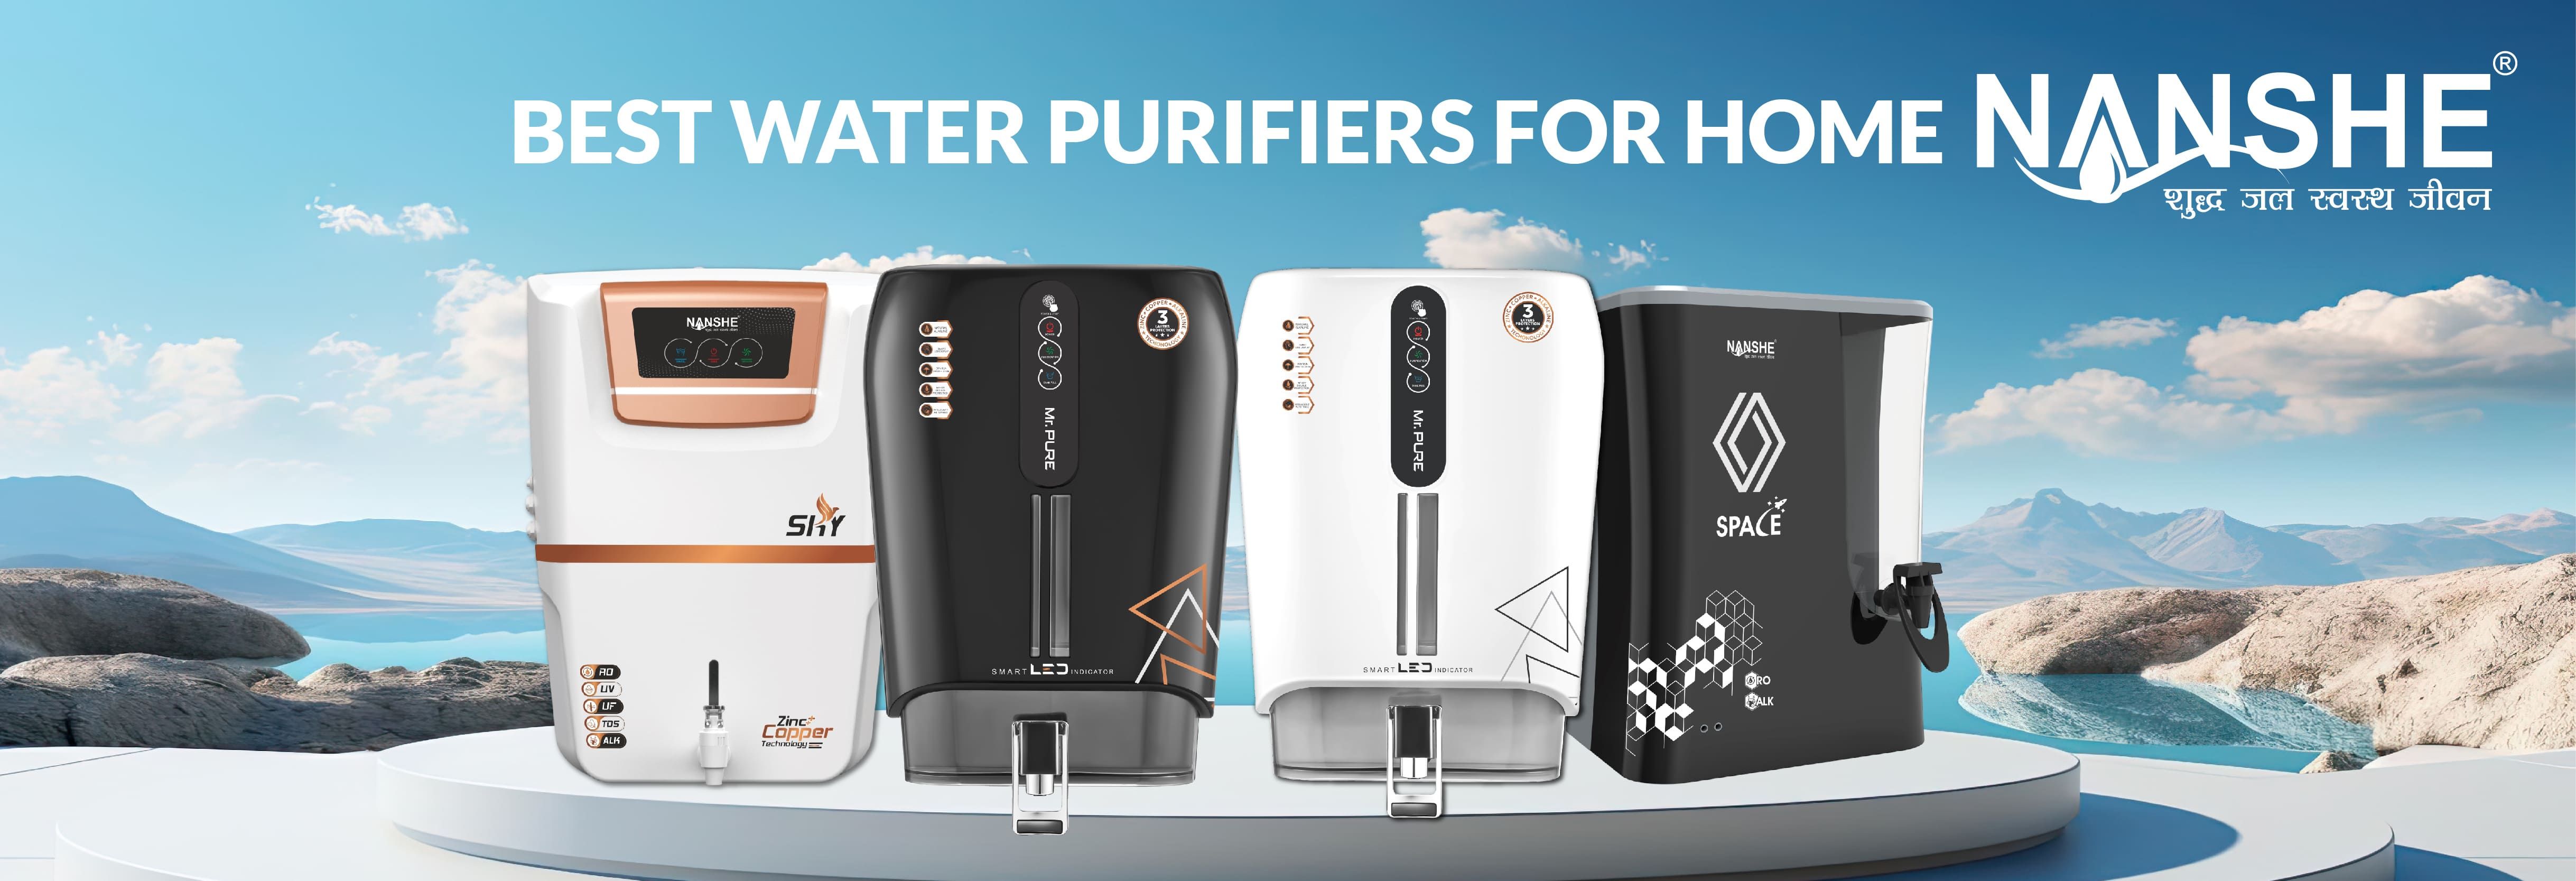 Best Water Purifiers for Home: Clean and Safe Drinking Water Solutions